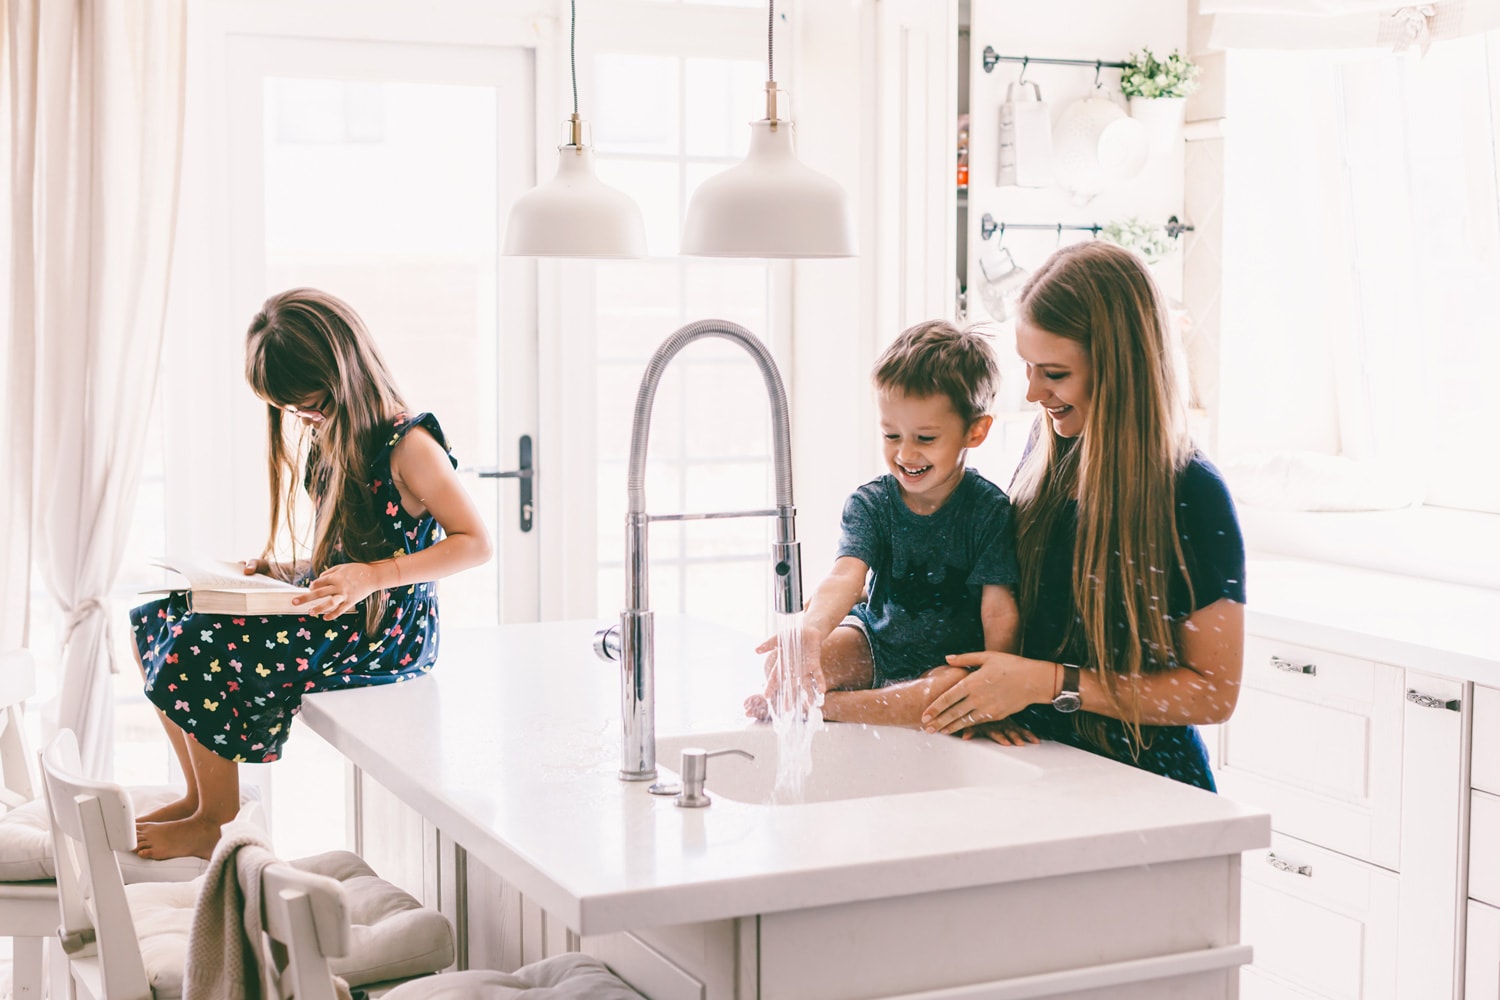 Mother with her children playing with water in kitchen sink at home. Happy lifestyle family moments.